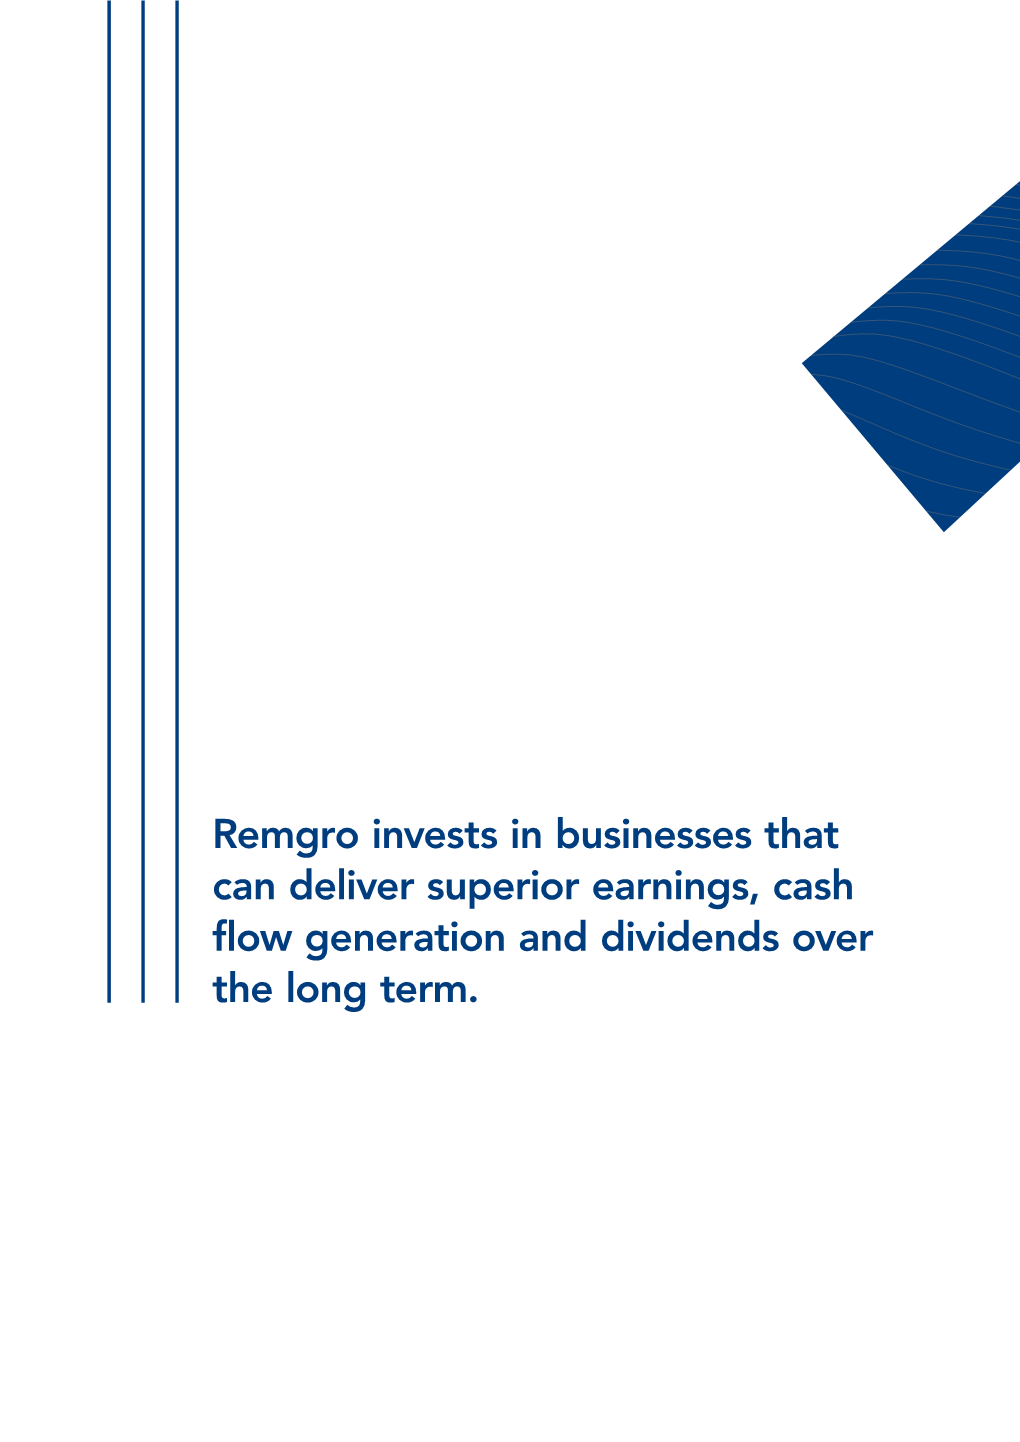 Remgro Invests in Businesses That Can Deliver Superior Earnings, Cash Flow Generation and Dividends Over the Long Term